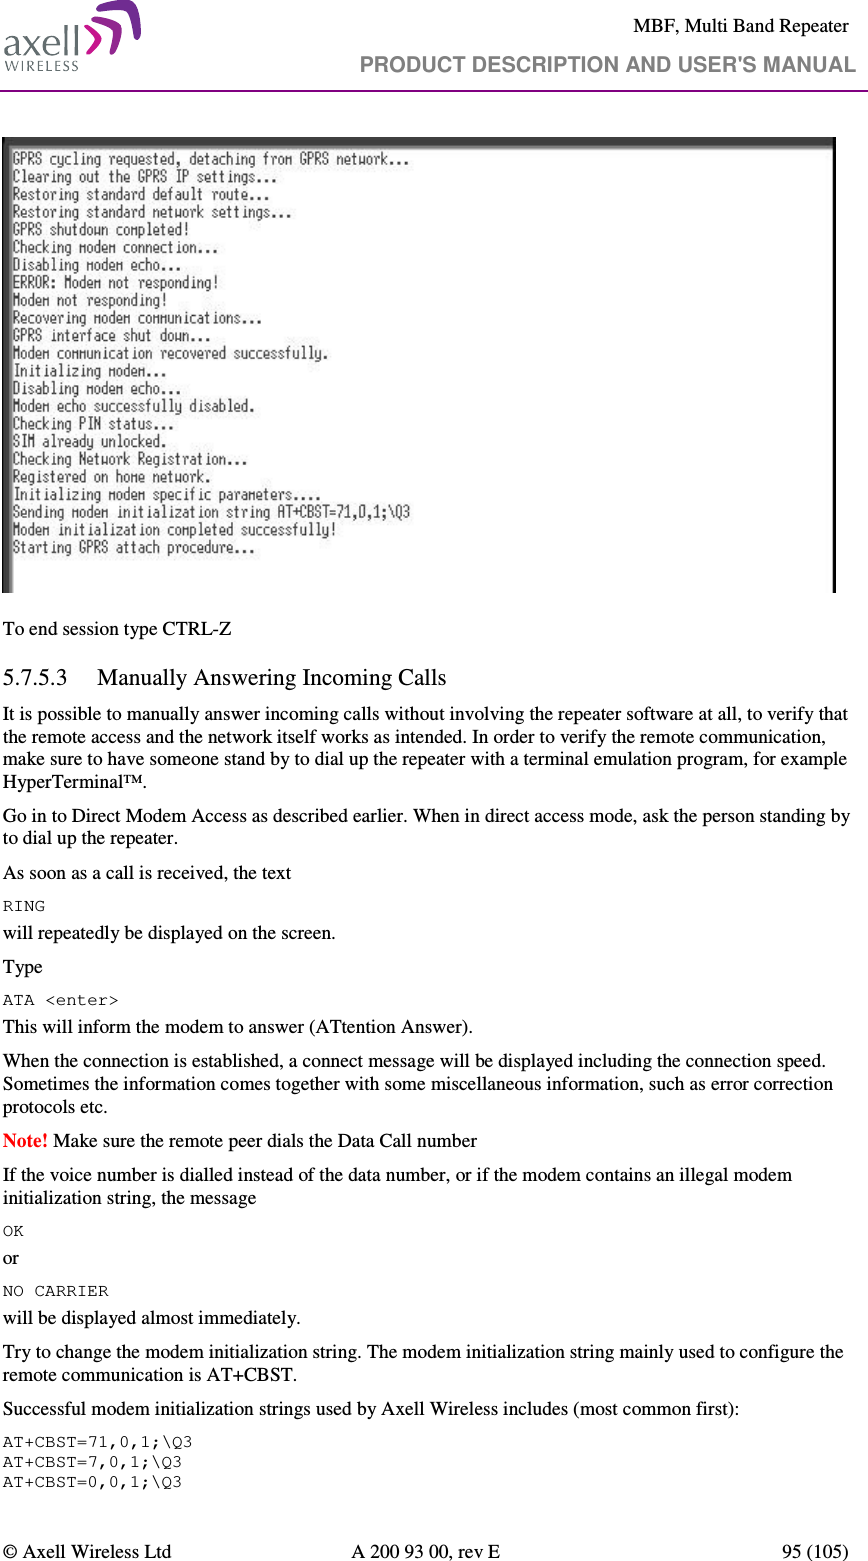     MBF, Multi Band Repeater                                     PRODUCT DESCRIPTION AND USER&apos;S MANUAL   © Axell Wireless Ltd  A 200 93 00, rev E  95 (105)    To end session type CTRL-Z 5.7.5.3 Manually Answering Incoming Calls It is possible to manually answer incoming calls without involving the repeater software at all, to verify that the remote access and the network itself works as intended. In order to verify the remote communication, make sure to have someone stand by to dial up the repeater with a terminal emulation program, for example HyperTerminal™. Go in to Direct Modem Access as described earlier. When in direct access mode, ask the person standing by to dial up the repeater. As soon as a call is received, the text RING will repeatedly be displayed on the screen.  Type ATA &lt;enter&gt; This will inform the modem to answer (ATtention Answer).  When the connection is established, a connect message will be displayed including the connection speed. Sometimes the information comes together with some miscellaneous information, such as error correction protocols etc.  Note! Make sure the remote peer dials the Data Call number If the voice number is dialled instead of the data number, or if the modem contains an illegal modem initialization string, the message  OK or NO CARRIER  will be displayed almost immediately.  Try to change the modem initialization string. The modem initialization string mainly used to configure the remote communication is AT+CBST.  Successful modem initialization strings used by Axell Wireless includes (most common first): AT+CBST=71,0,1;\Q3 AT+CBST=7,0,1;\Q3 AT+CBST=0,0,1;\Q3 